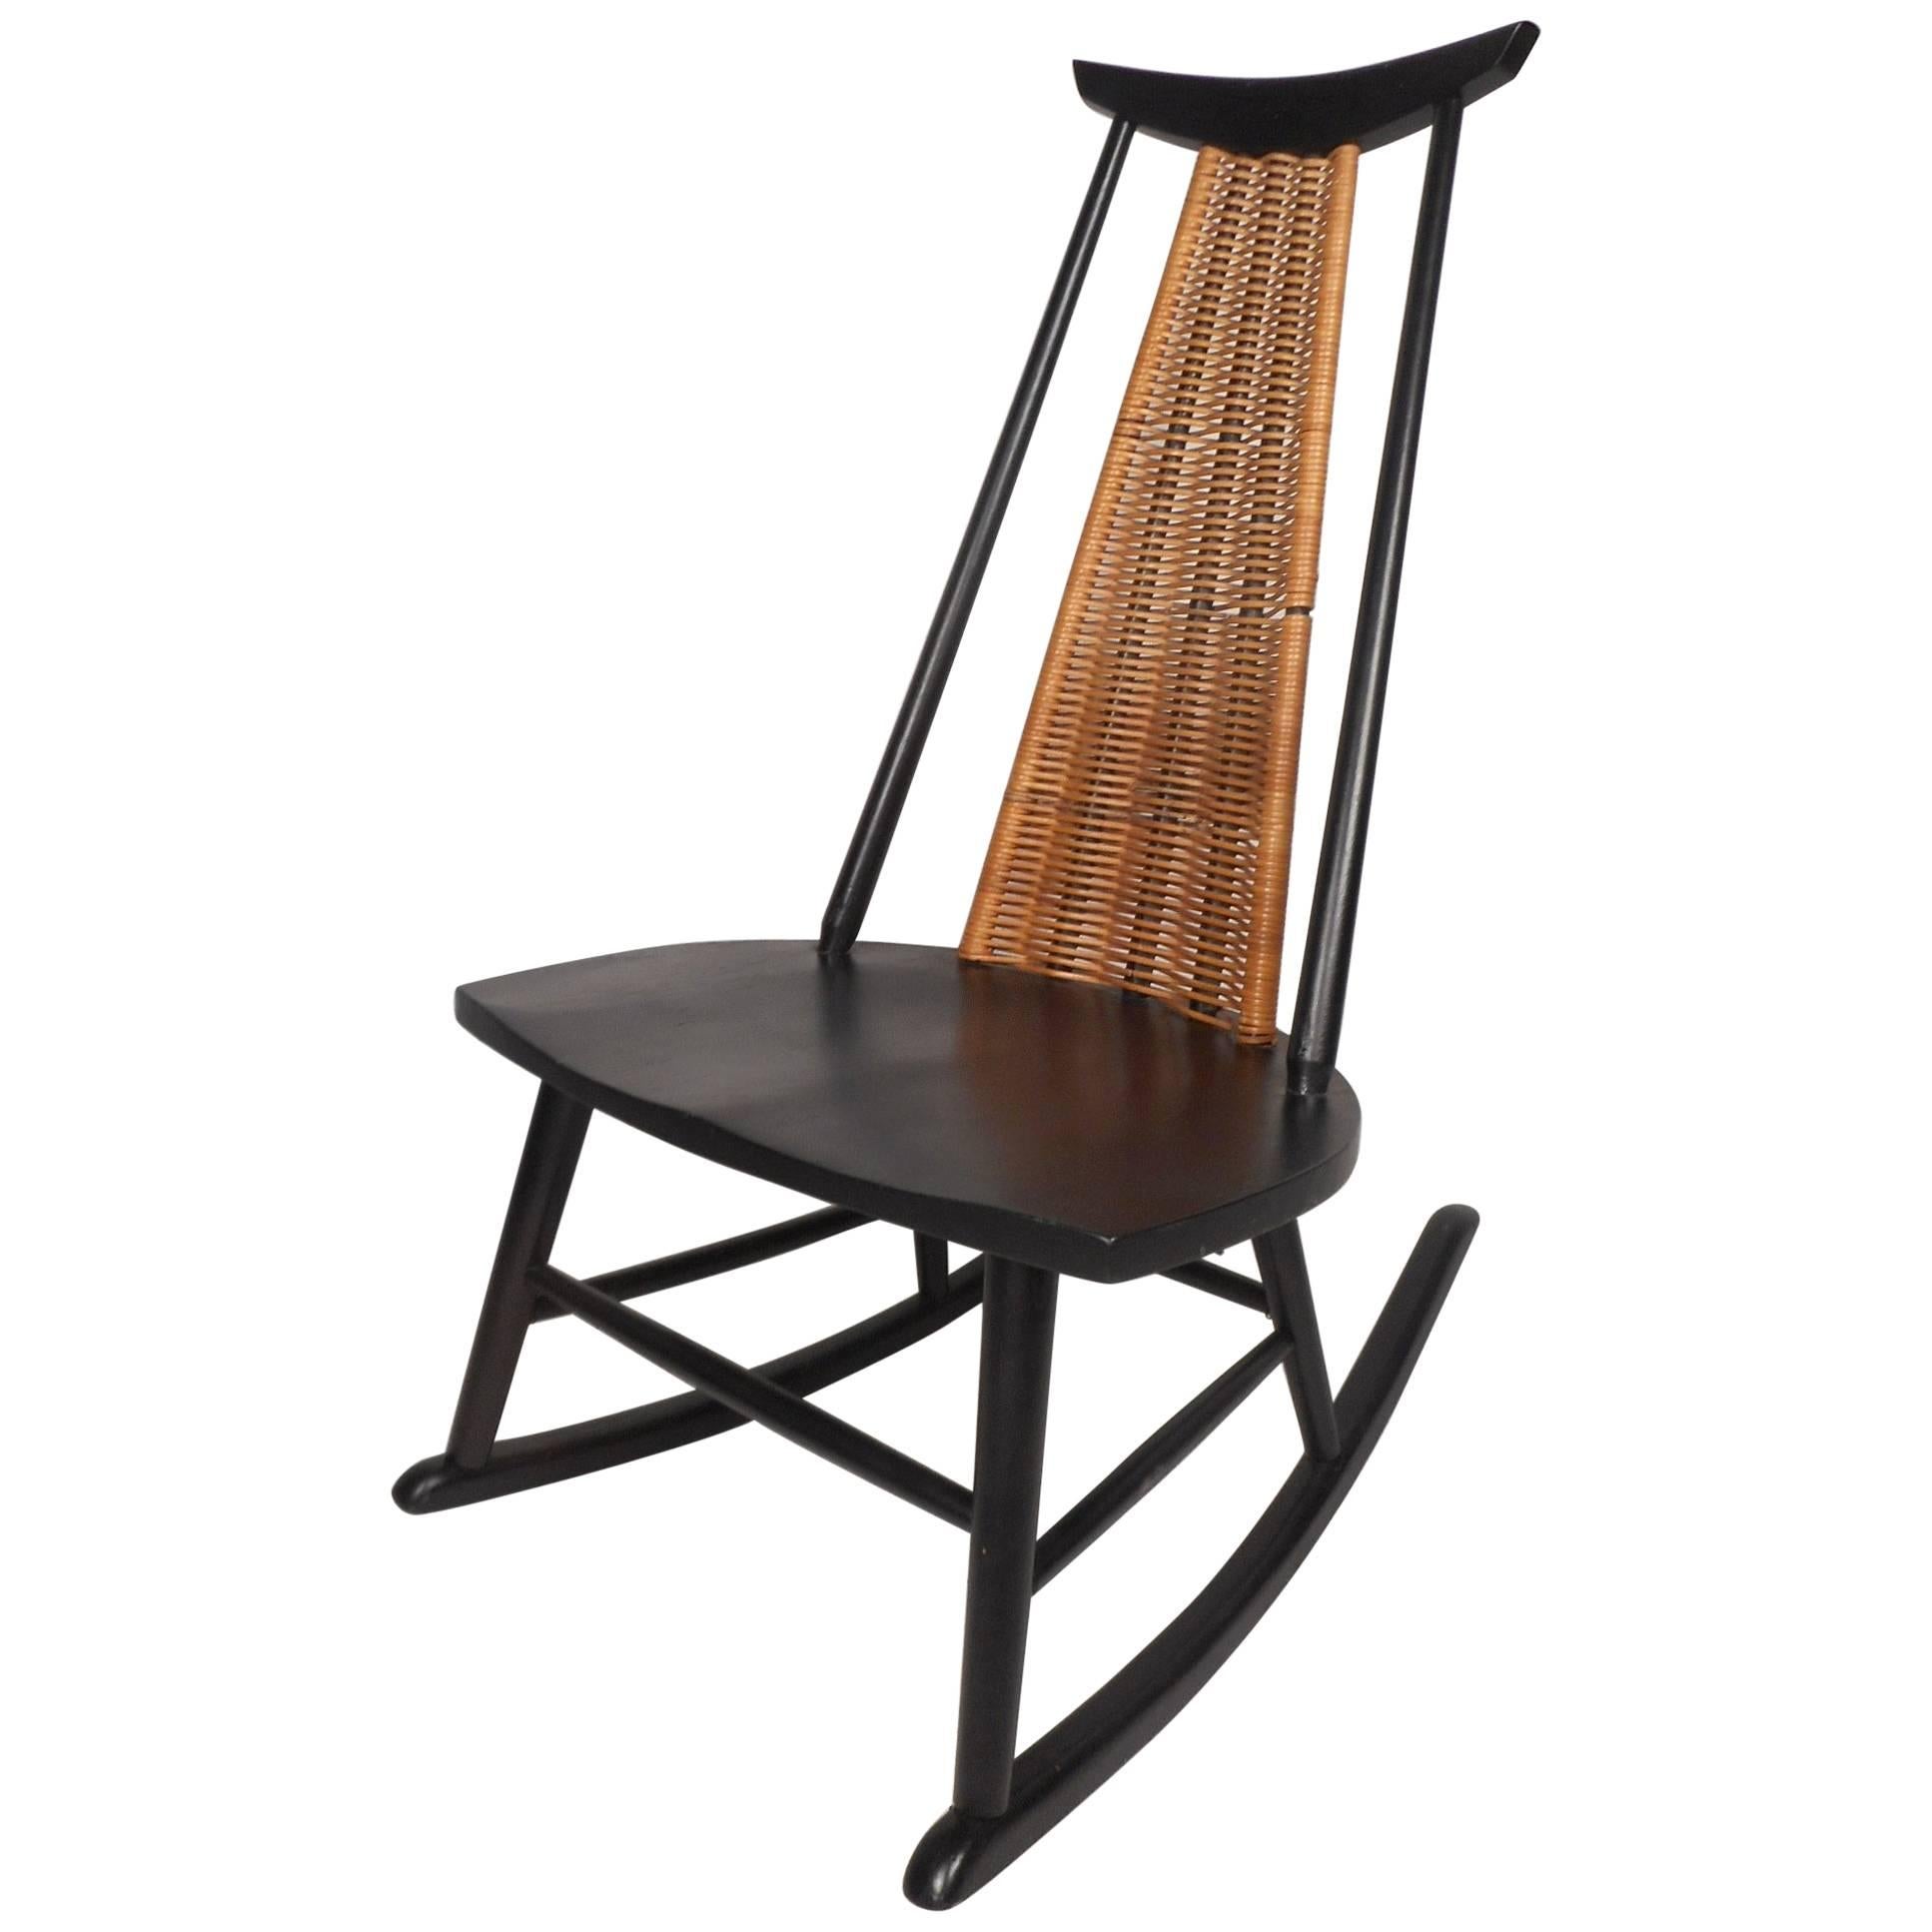 Mid-Century Modern Danish Rocking Chair with a Woven Back Rest